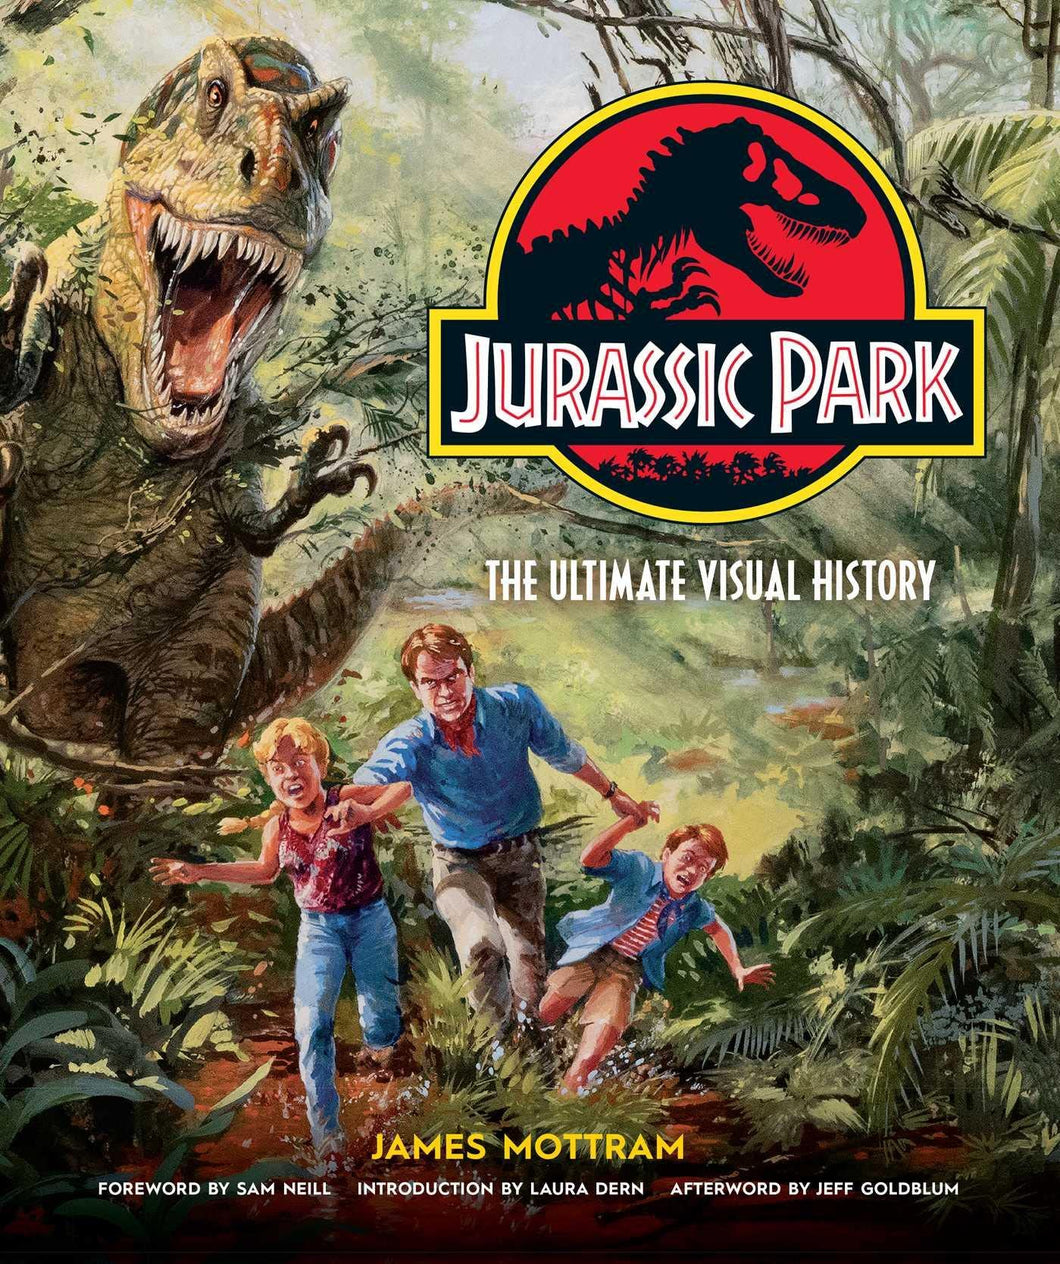 Jurassic Park: The Ultimate Visual History (Hardcover)